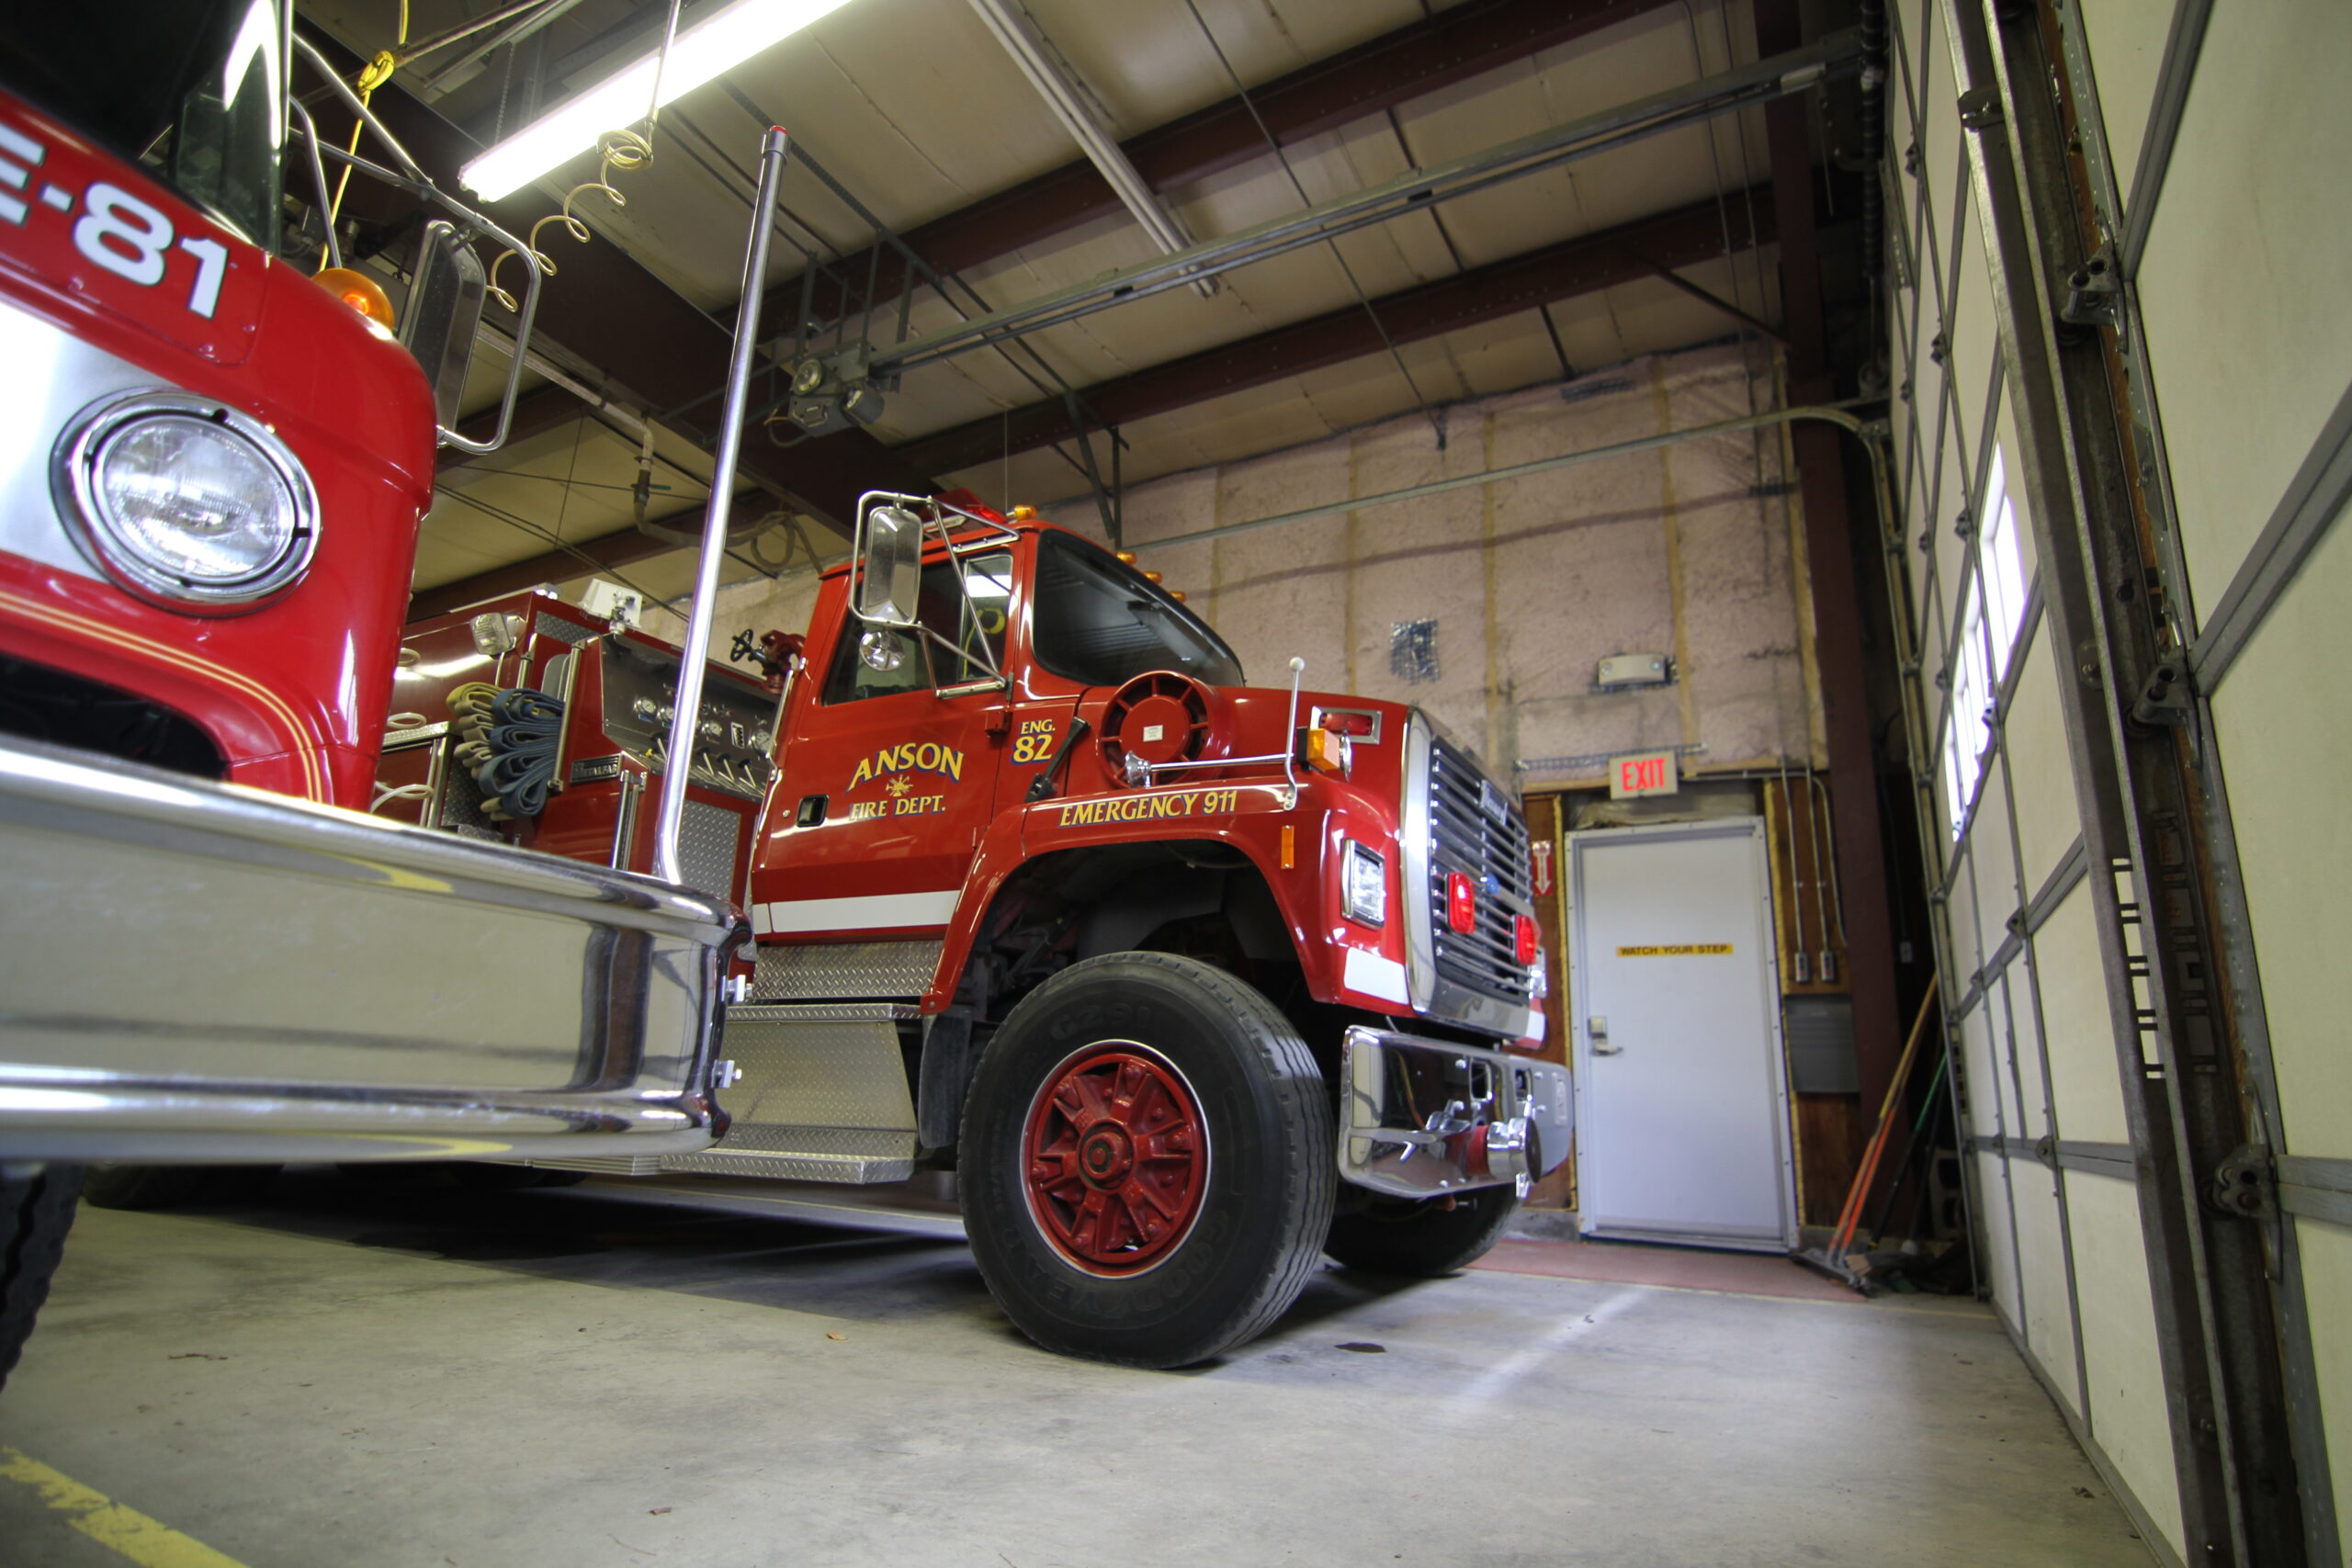 A firetruck viewed from the side.